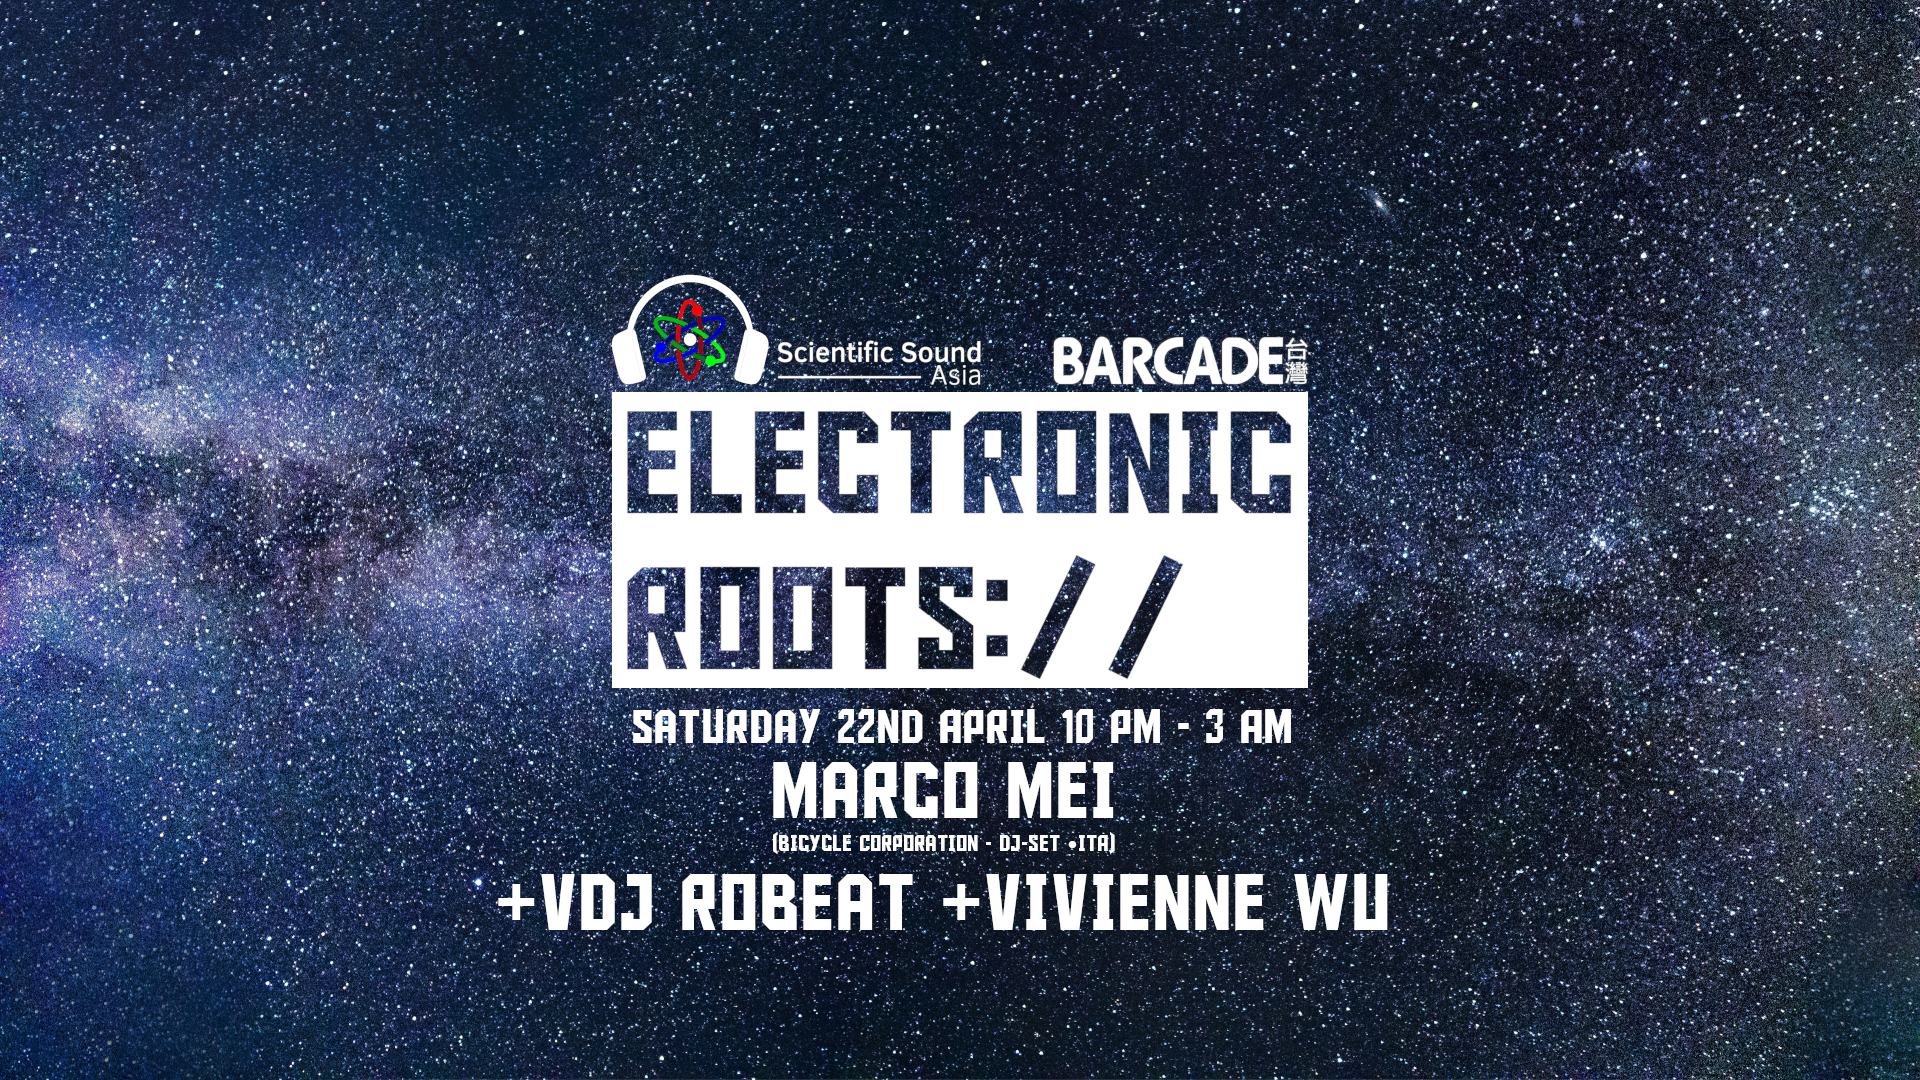 Scientific Sound Asia X Barcade Taiwan ~ Electronic Roots (Free Entry) - フライヤー表